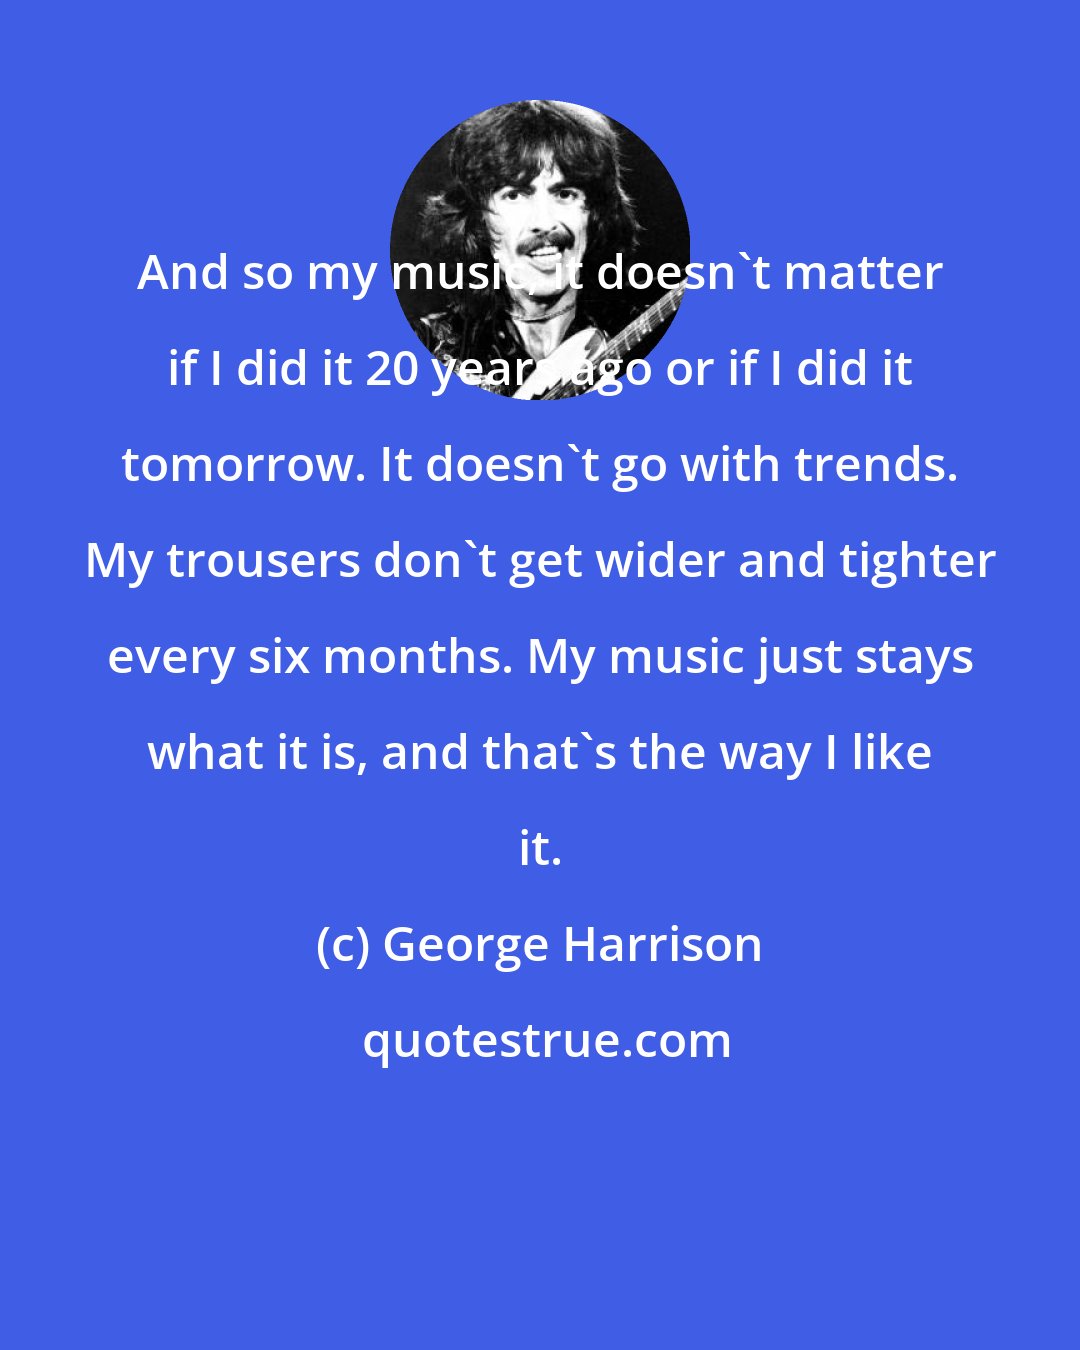 George Harrison: And so my music, it doesn't matter if I did it 20 years ago or if I did it tomorrow. It doesn't go with trends. My trousers don't get wider and tighter every six months. My music just stays what it is, and that's the way I like it.